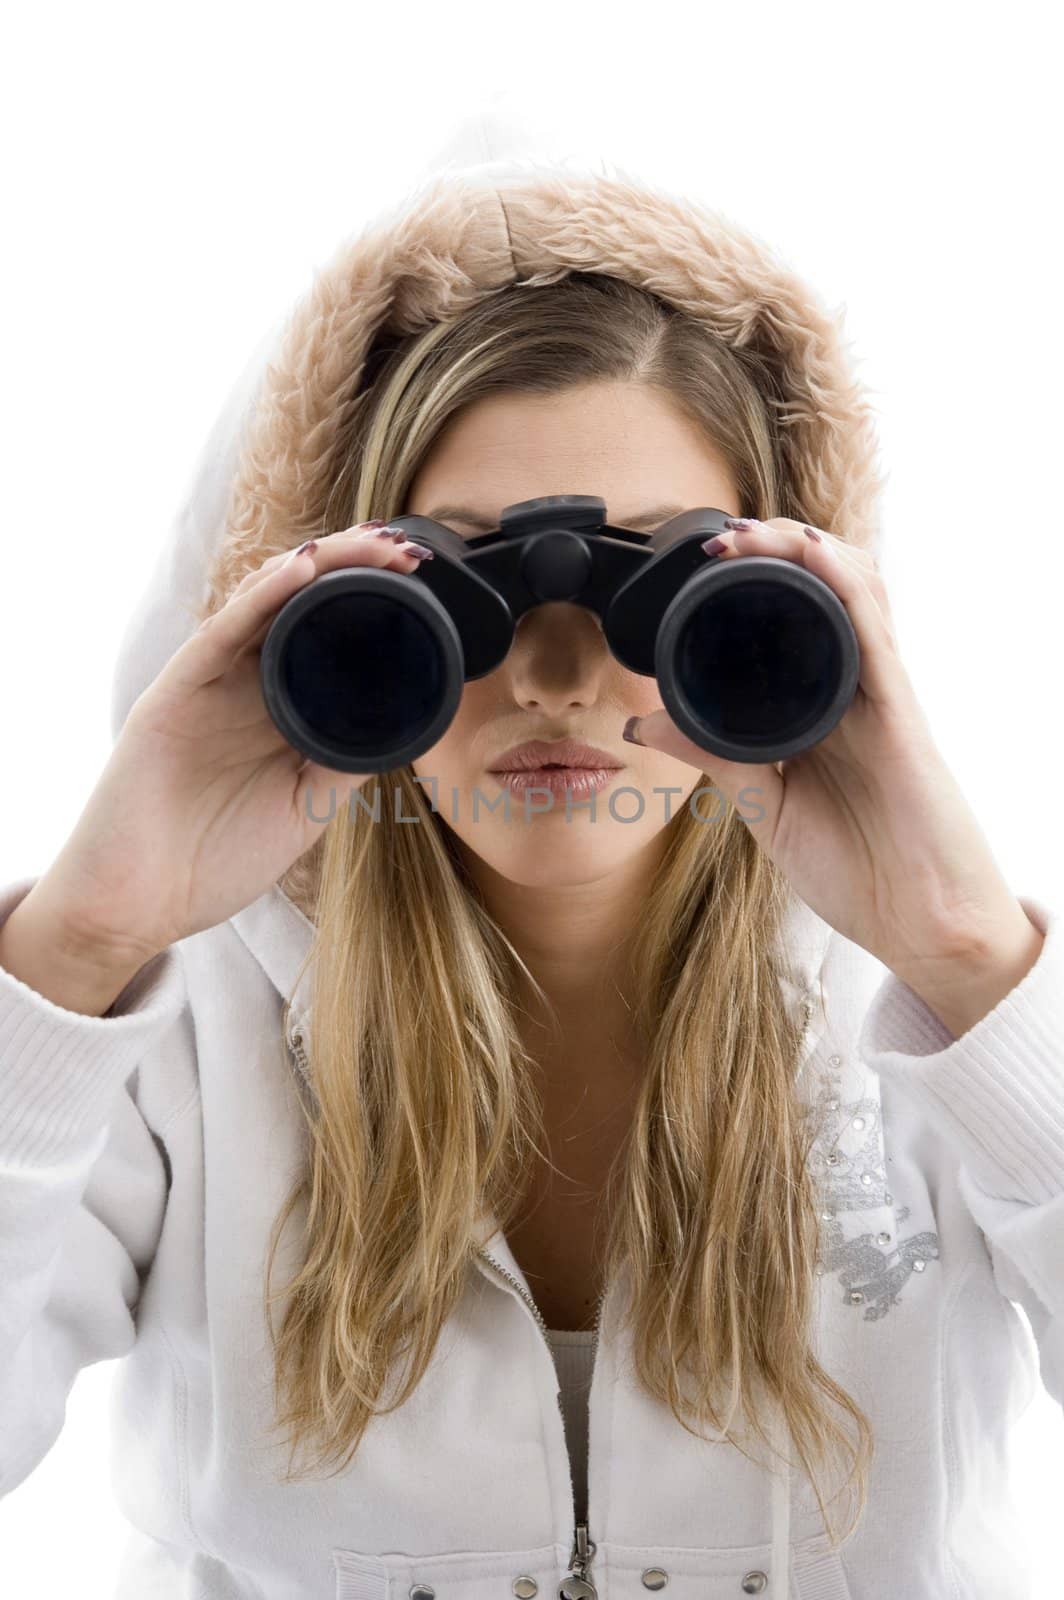 professional photographer eyeing with binoculars on an isolated white background